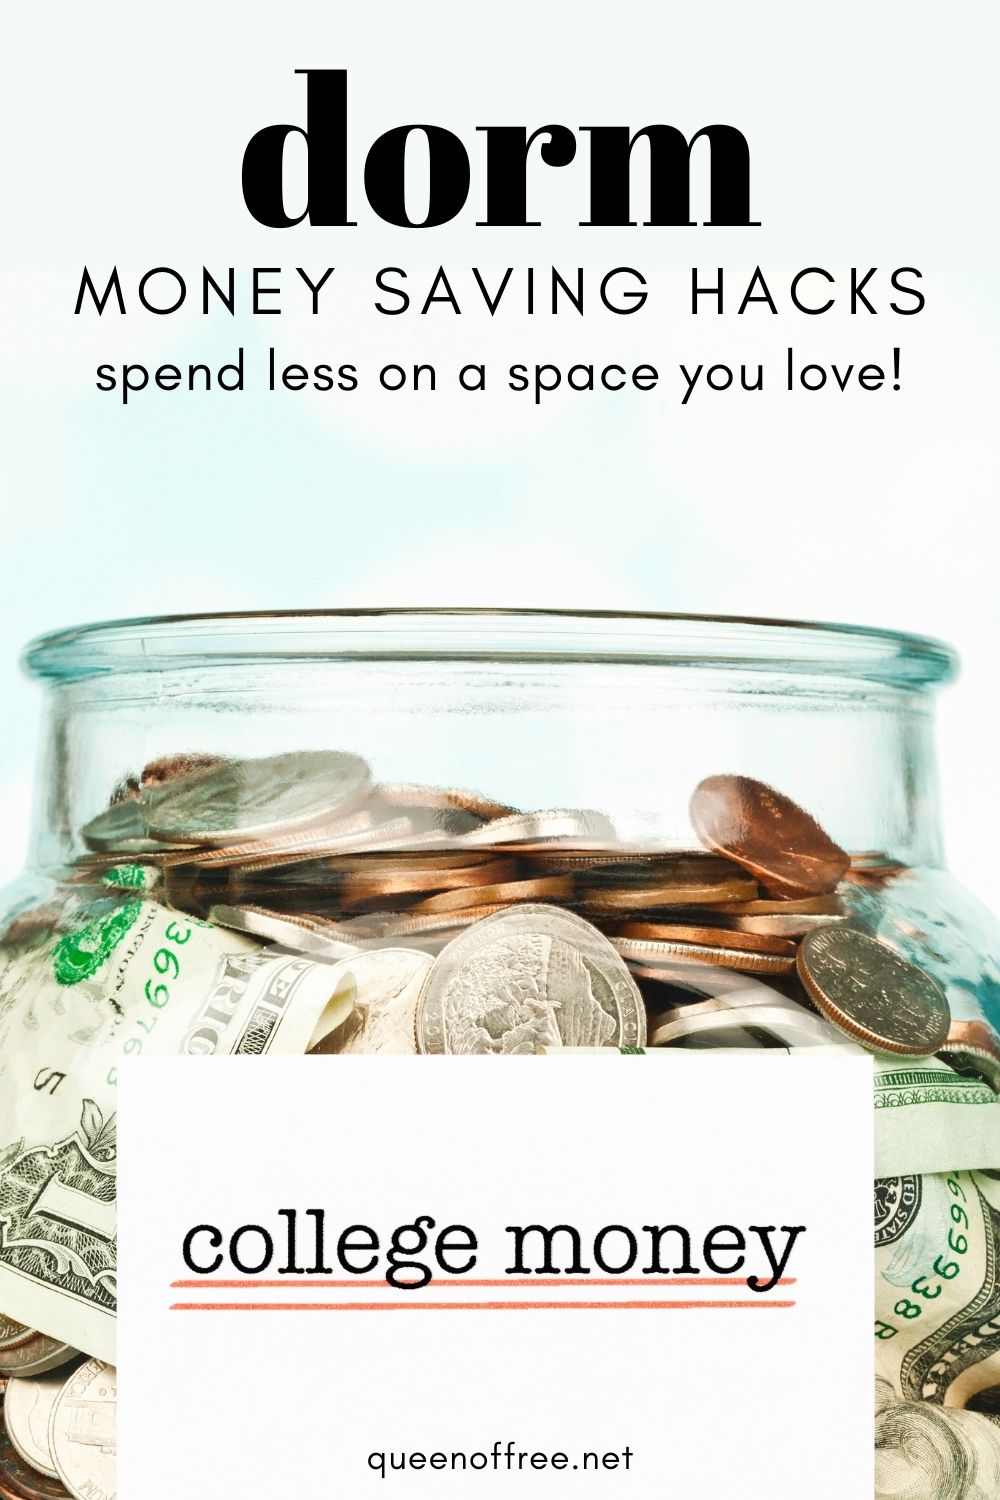 Headed back to campus? These Dorm Money Saving Hacks will keep your spending in check and your scholar on track.